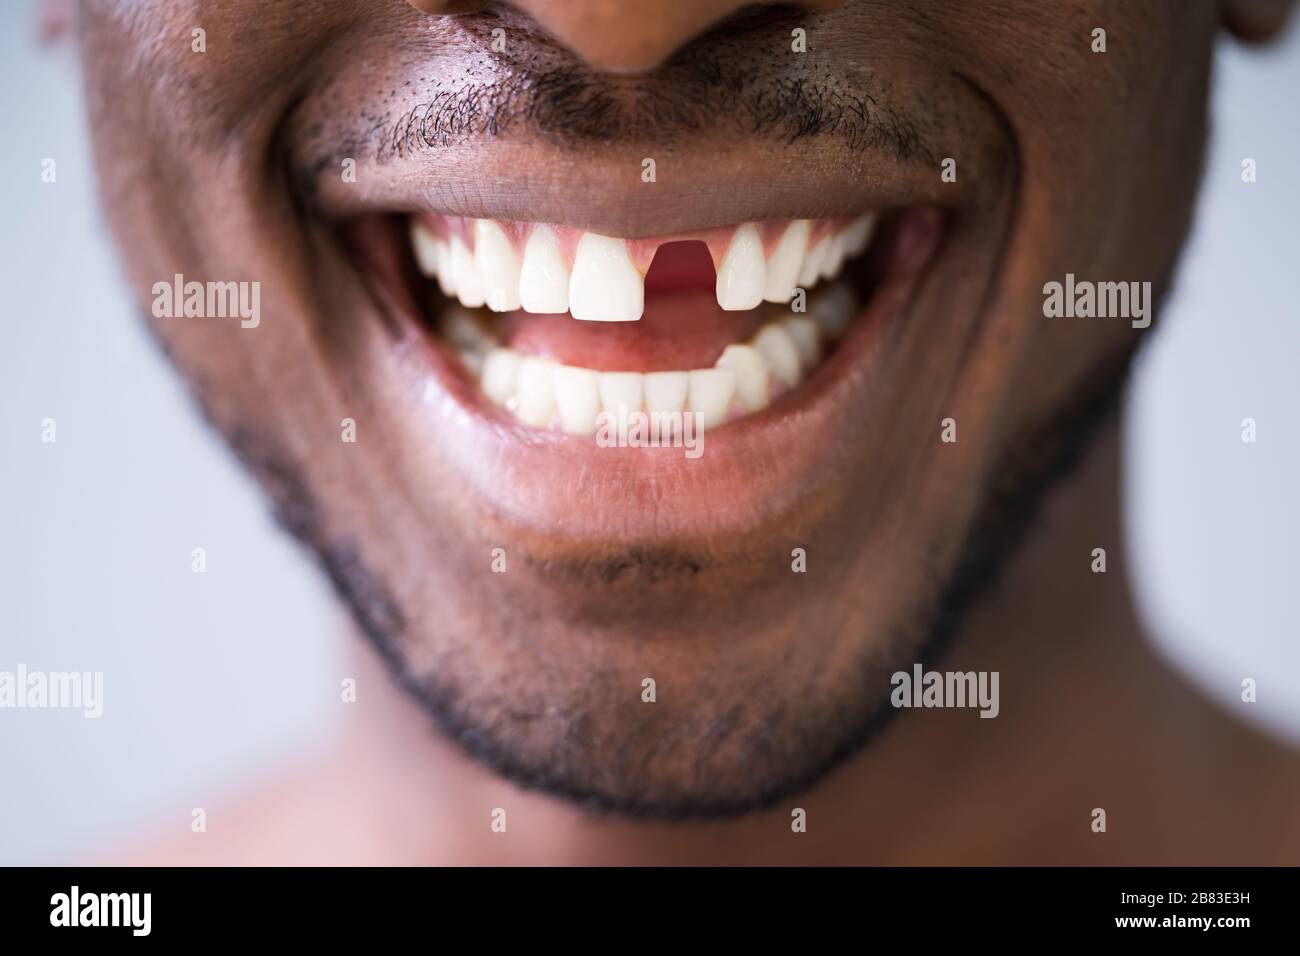 Close Up Photo Of Young Man With Missing Tooth Stock Photo